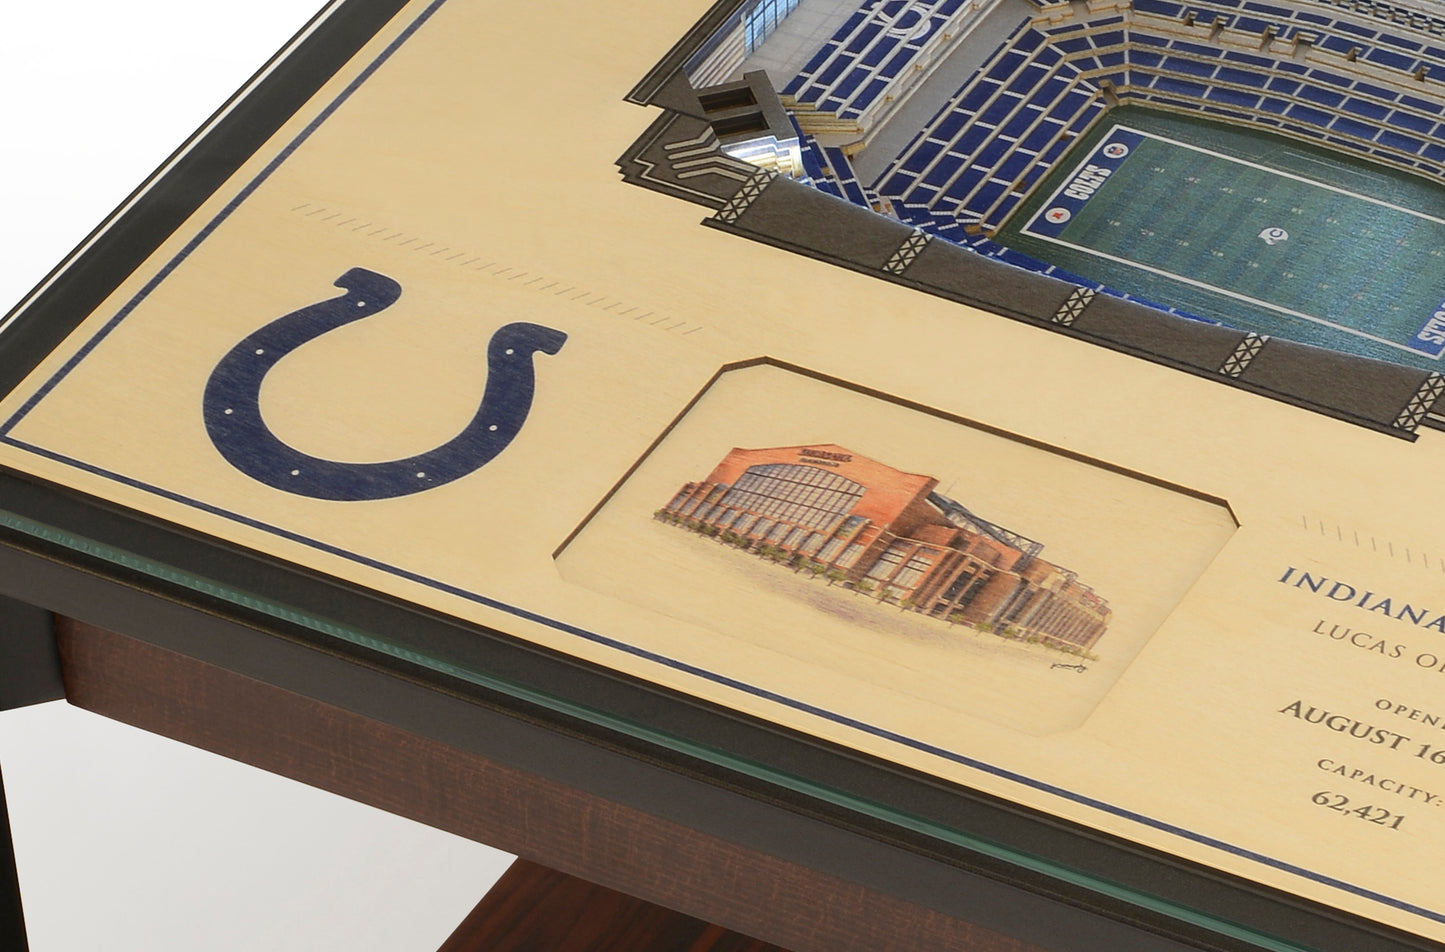 INDIANAPOLIS COLTS 25 LAYER 3D STADIUM LIGHTED END TABLE